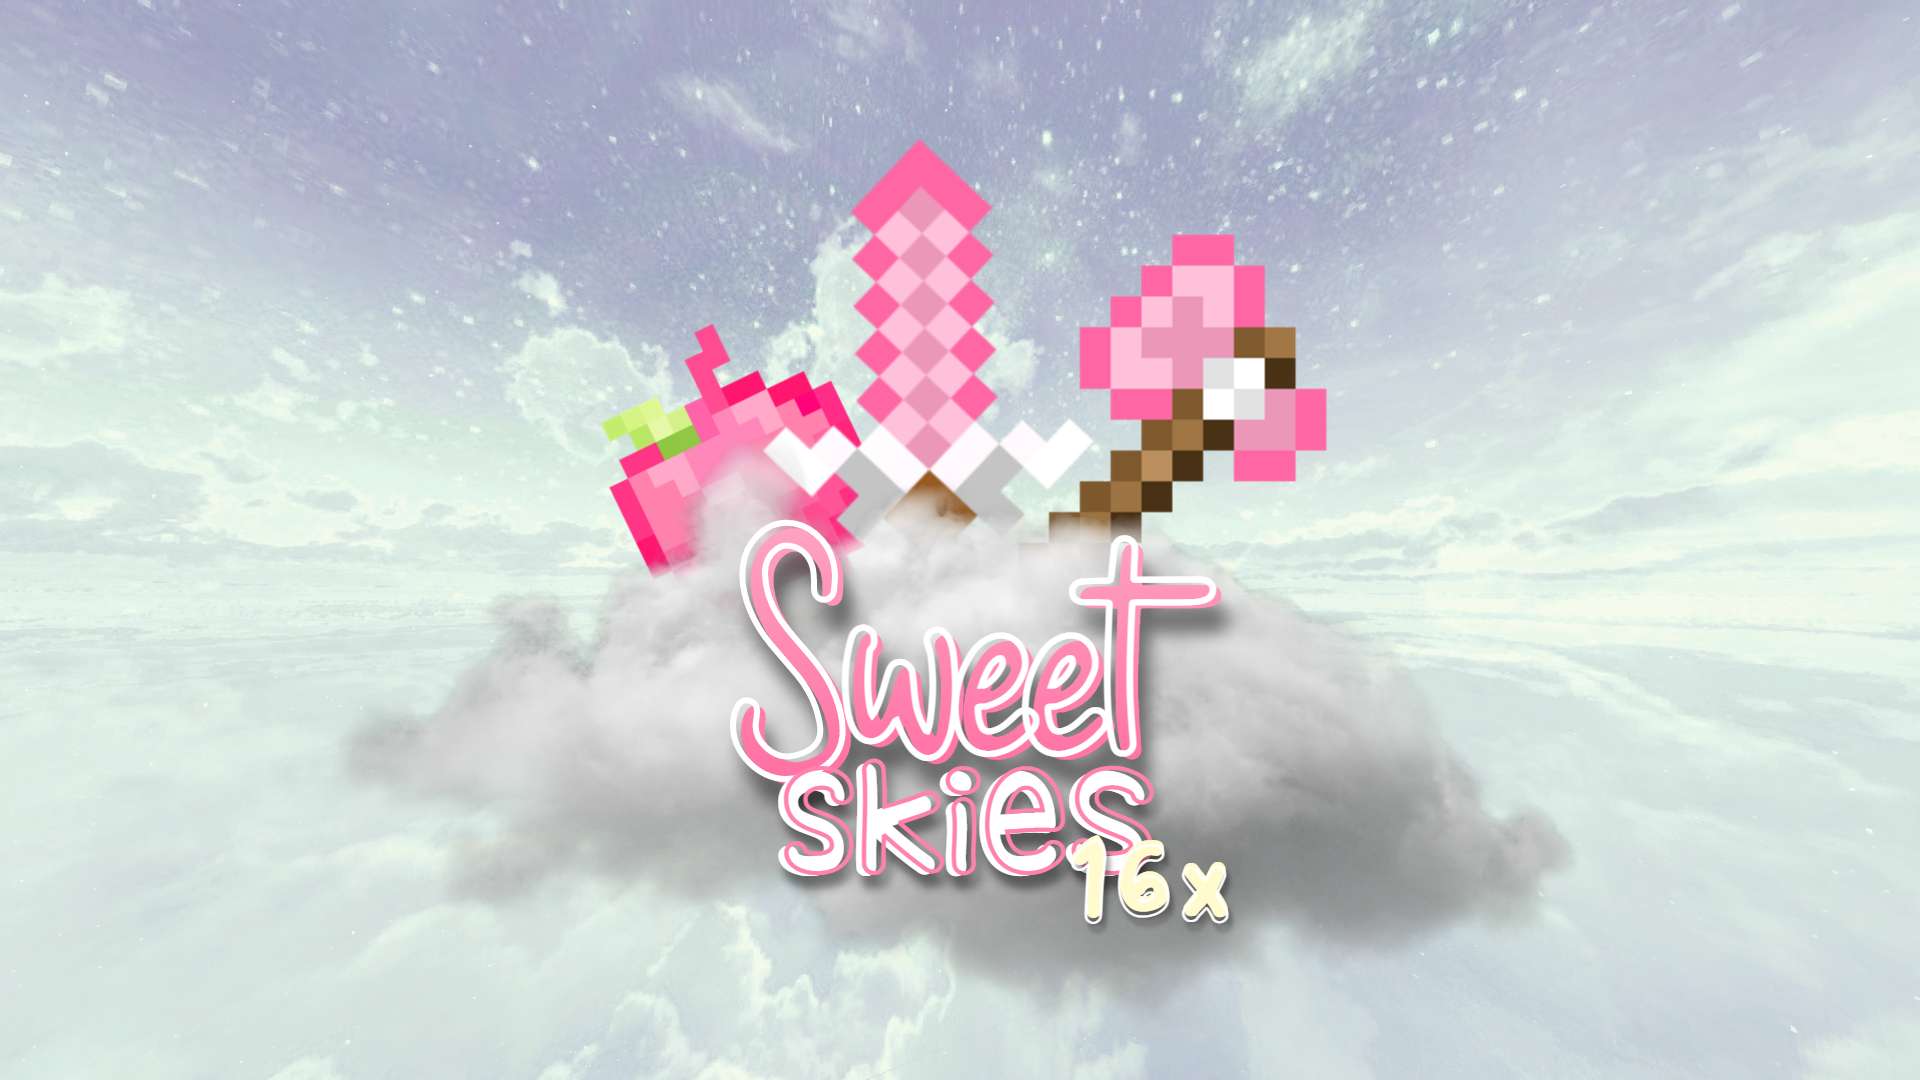 Sweet Skies 16 by _xhelena on PvPRP